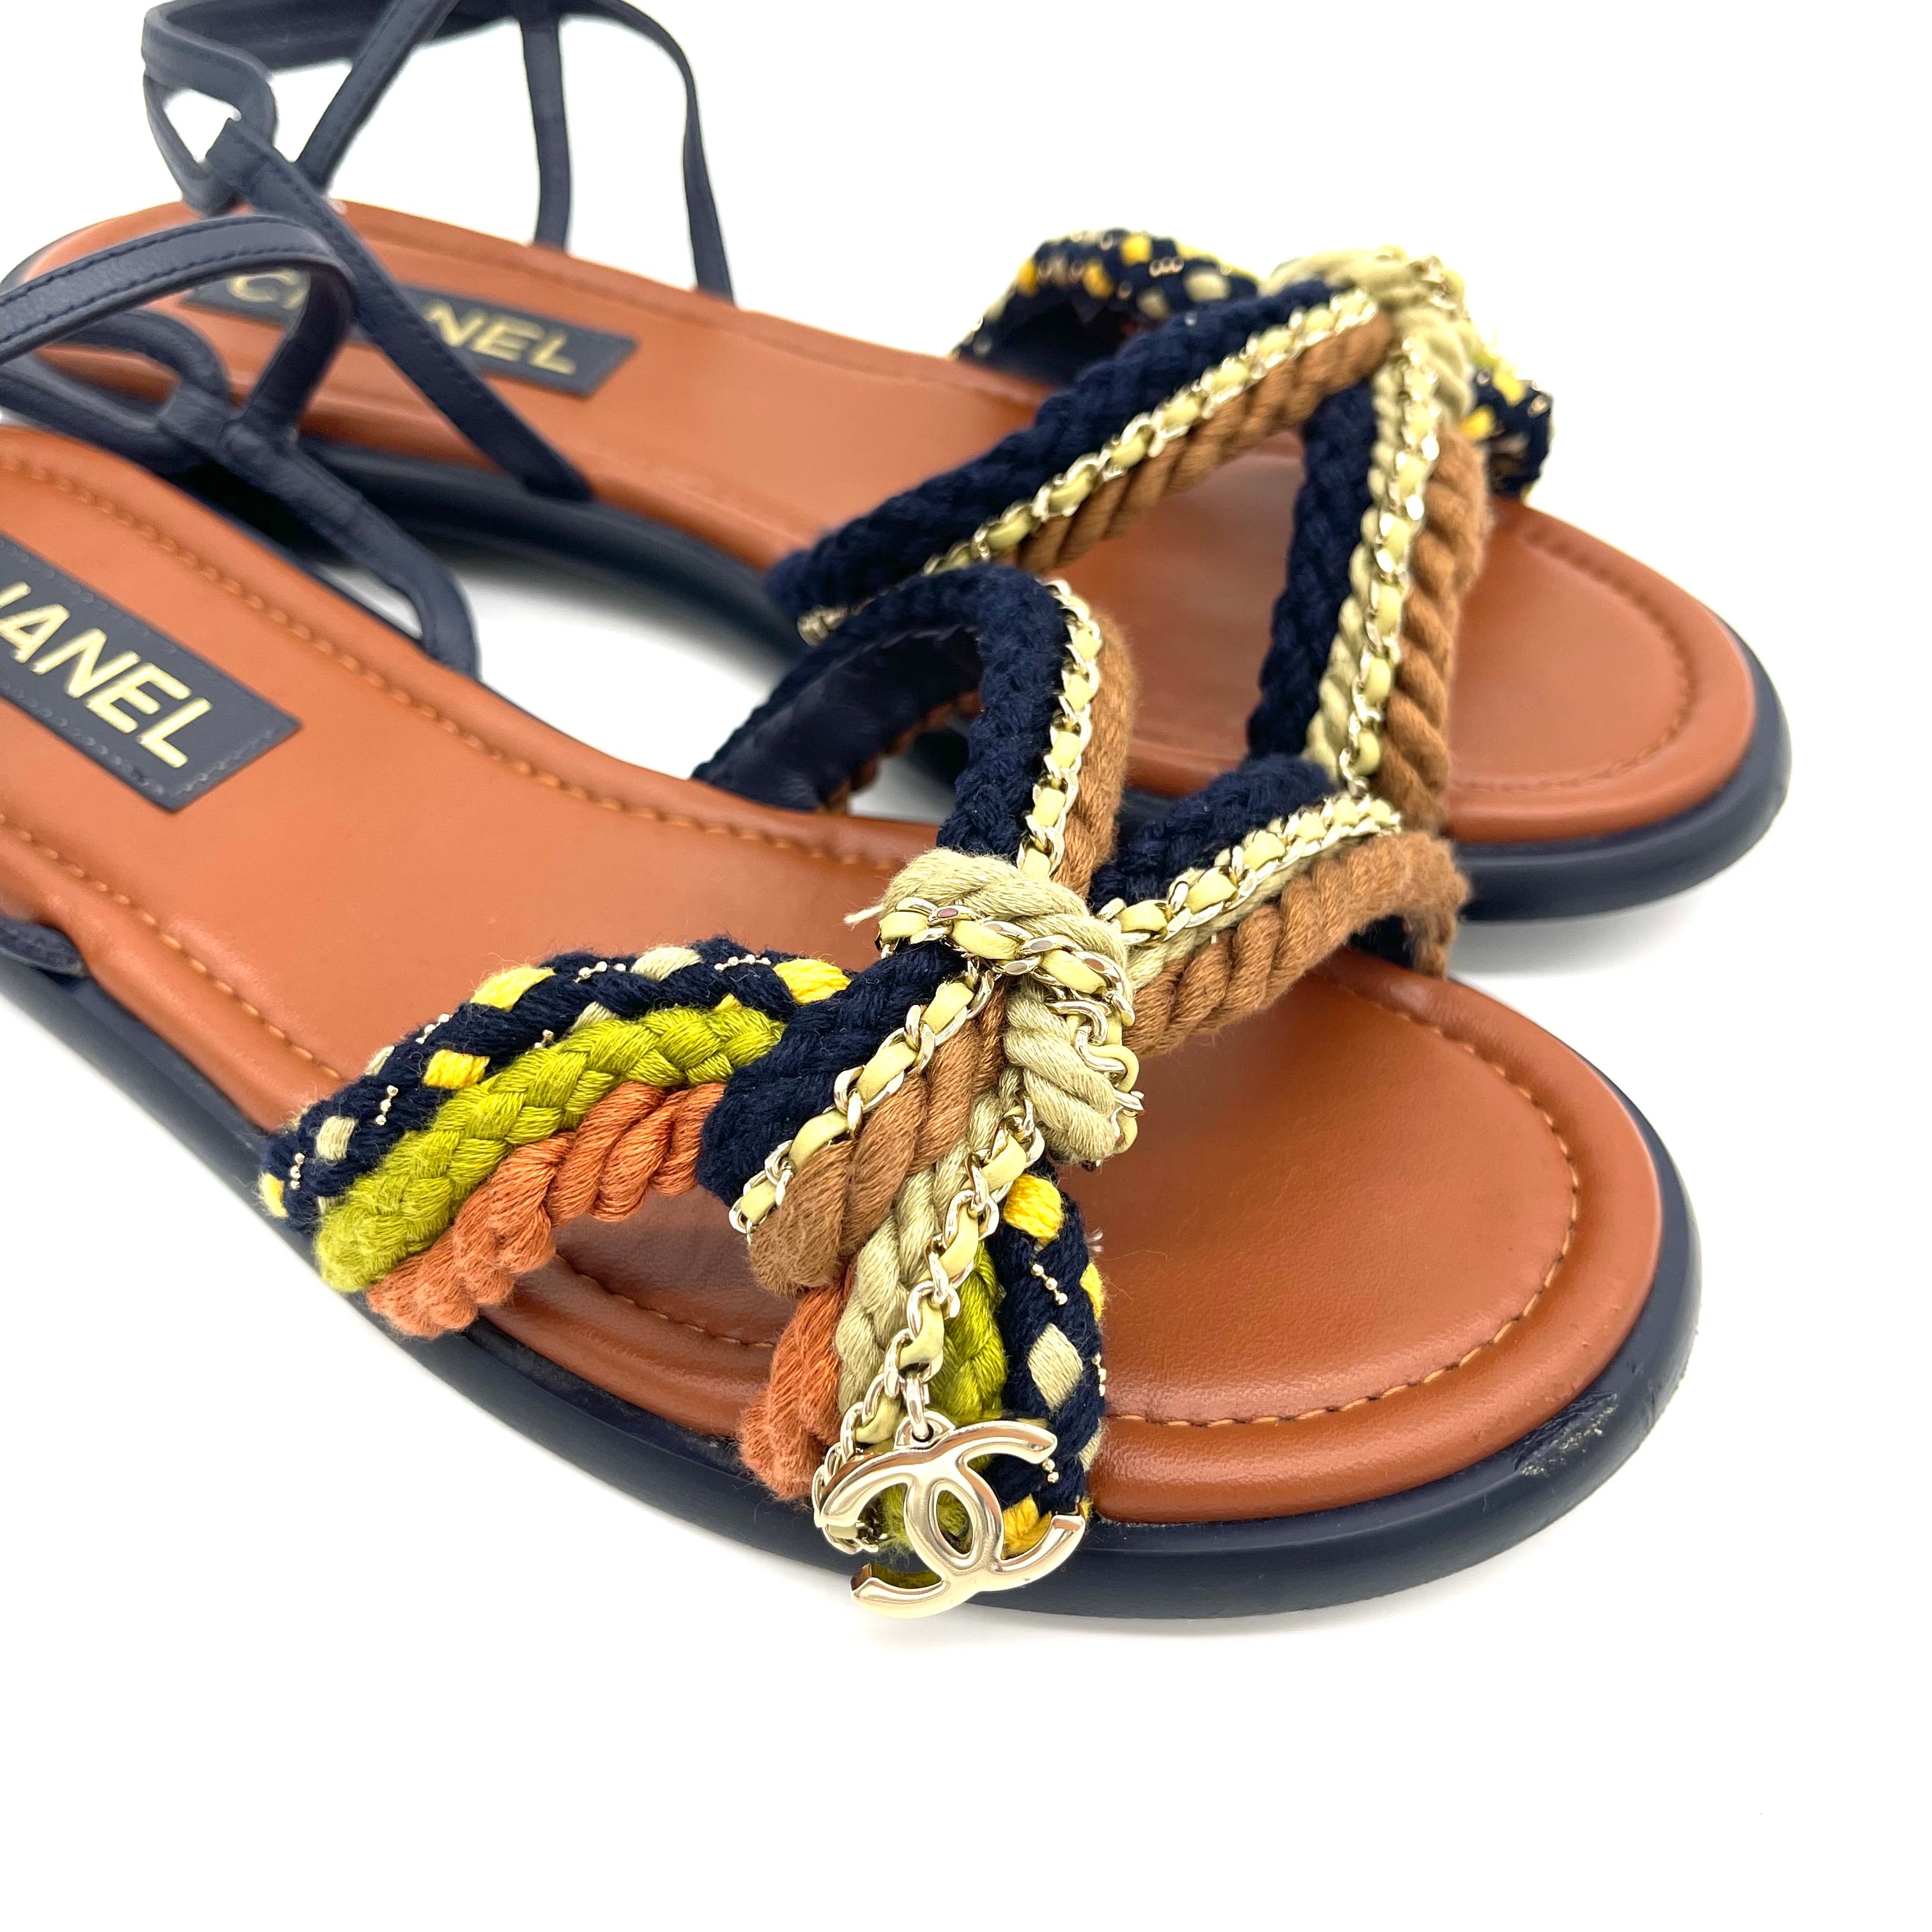 Chanel Rope Sandals Size40 Retail Price